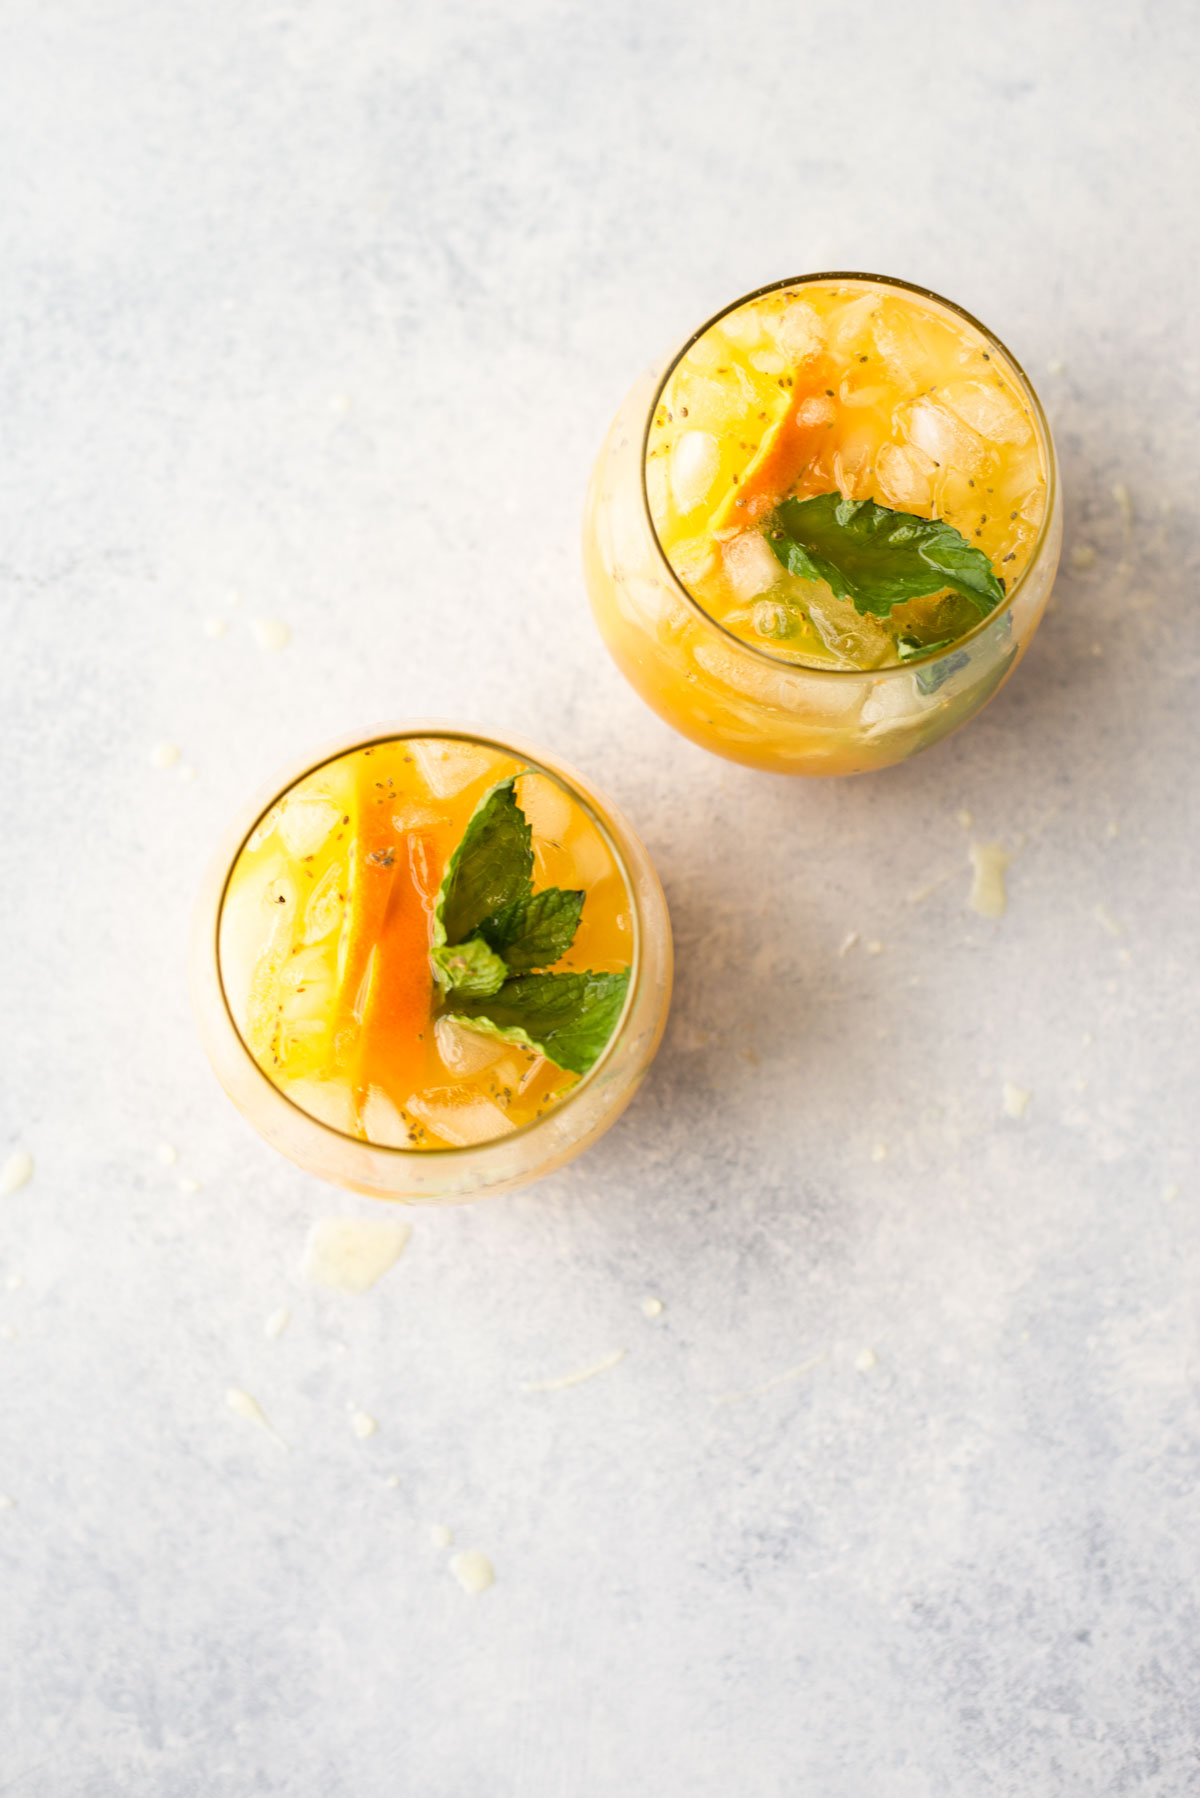 This quick 5-minute refresher has powerful health benefits of turmeric. Check out this refreshing citrus turmeric drink here.